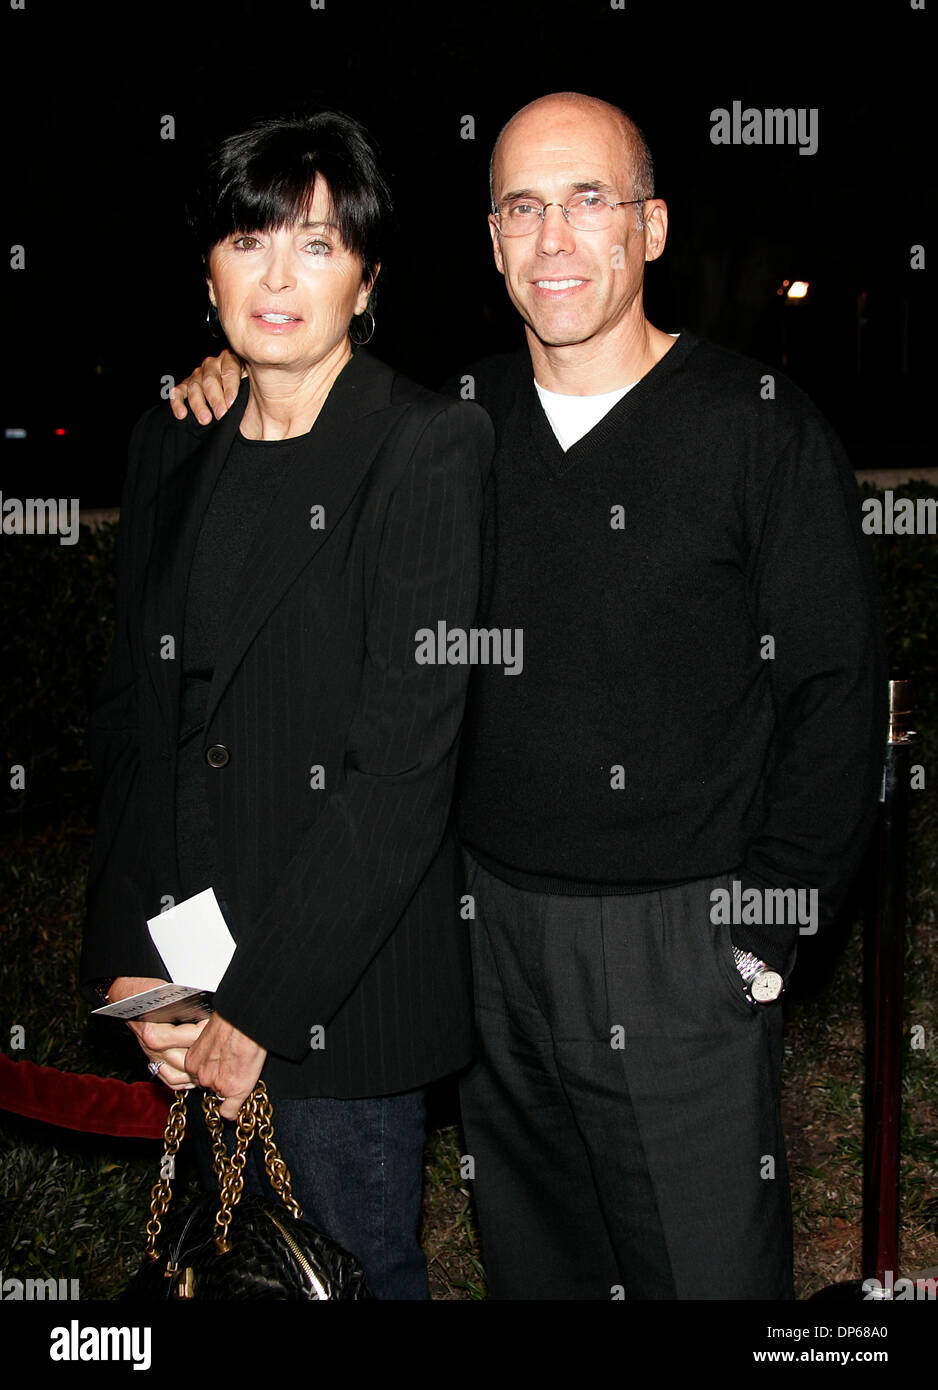 Oct 9, 2006; Beverly Hills, California, USA; Producer JEFFREY KATZENBERG & Wife MARILYN at the 'Flags Of Our Fathers' Los Angeles Premiere held at the Academy of Motion Pictures Theatre. Mandatory Credit: Photo by Lisa O'Connor/ZUMA Press. (©) Copyright 2006 by Lisa O'Connor Stock Photo